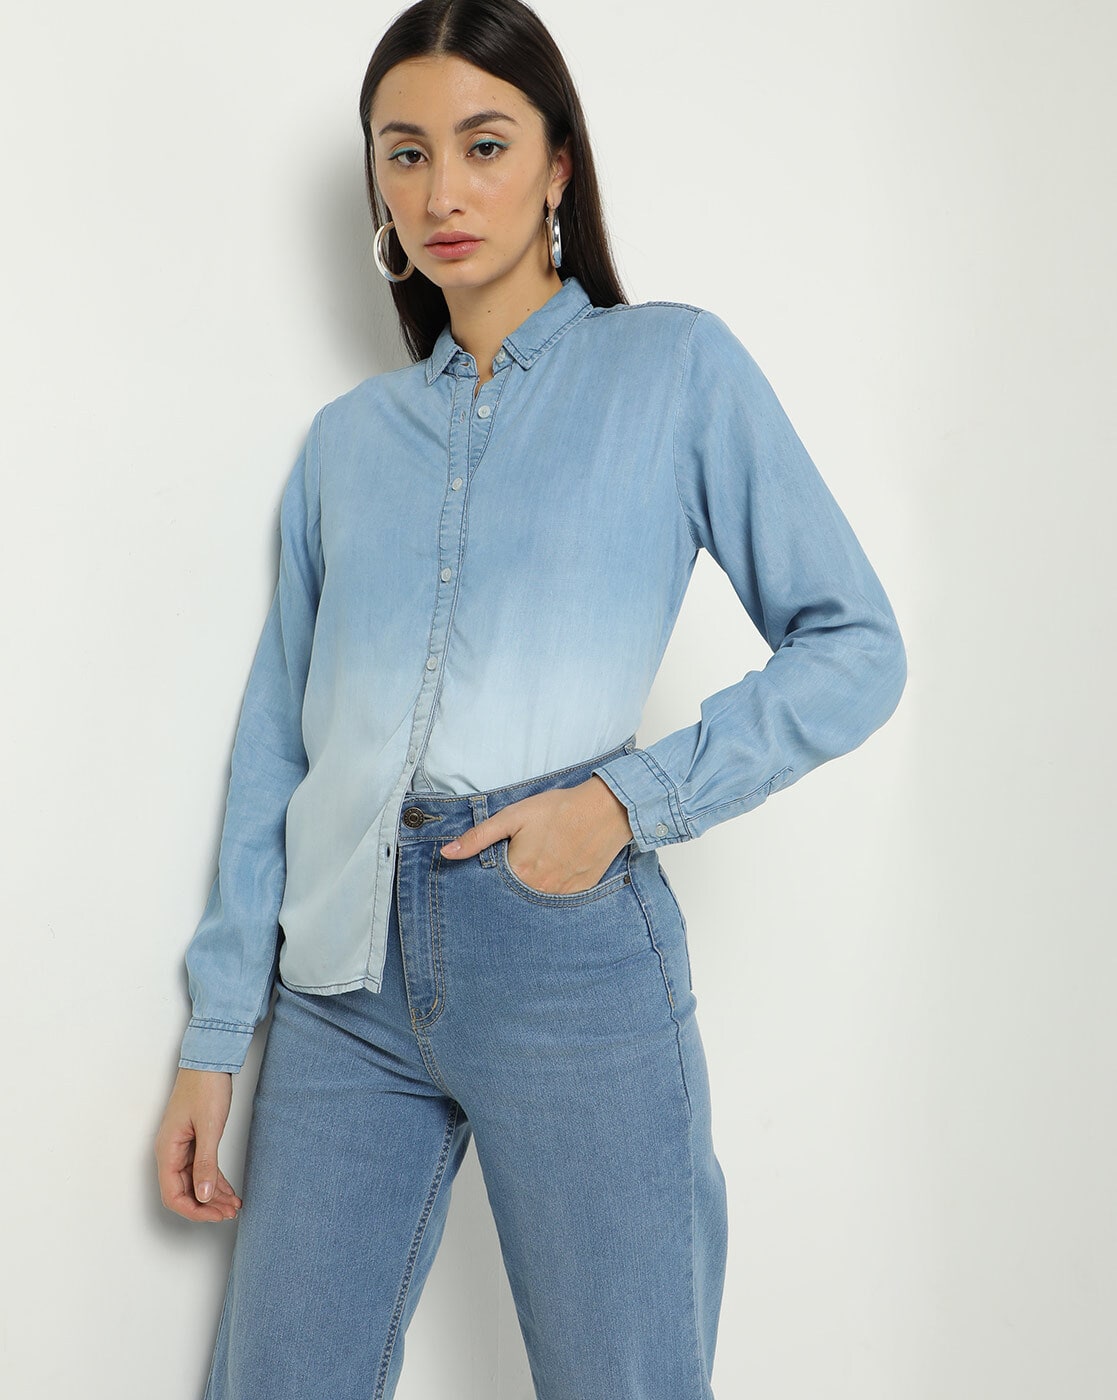 Levi's Mid Indigo Cotton Shirt Dress Price in India, Full Specifications &  Offers | DTashion.com